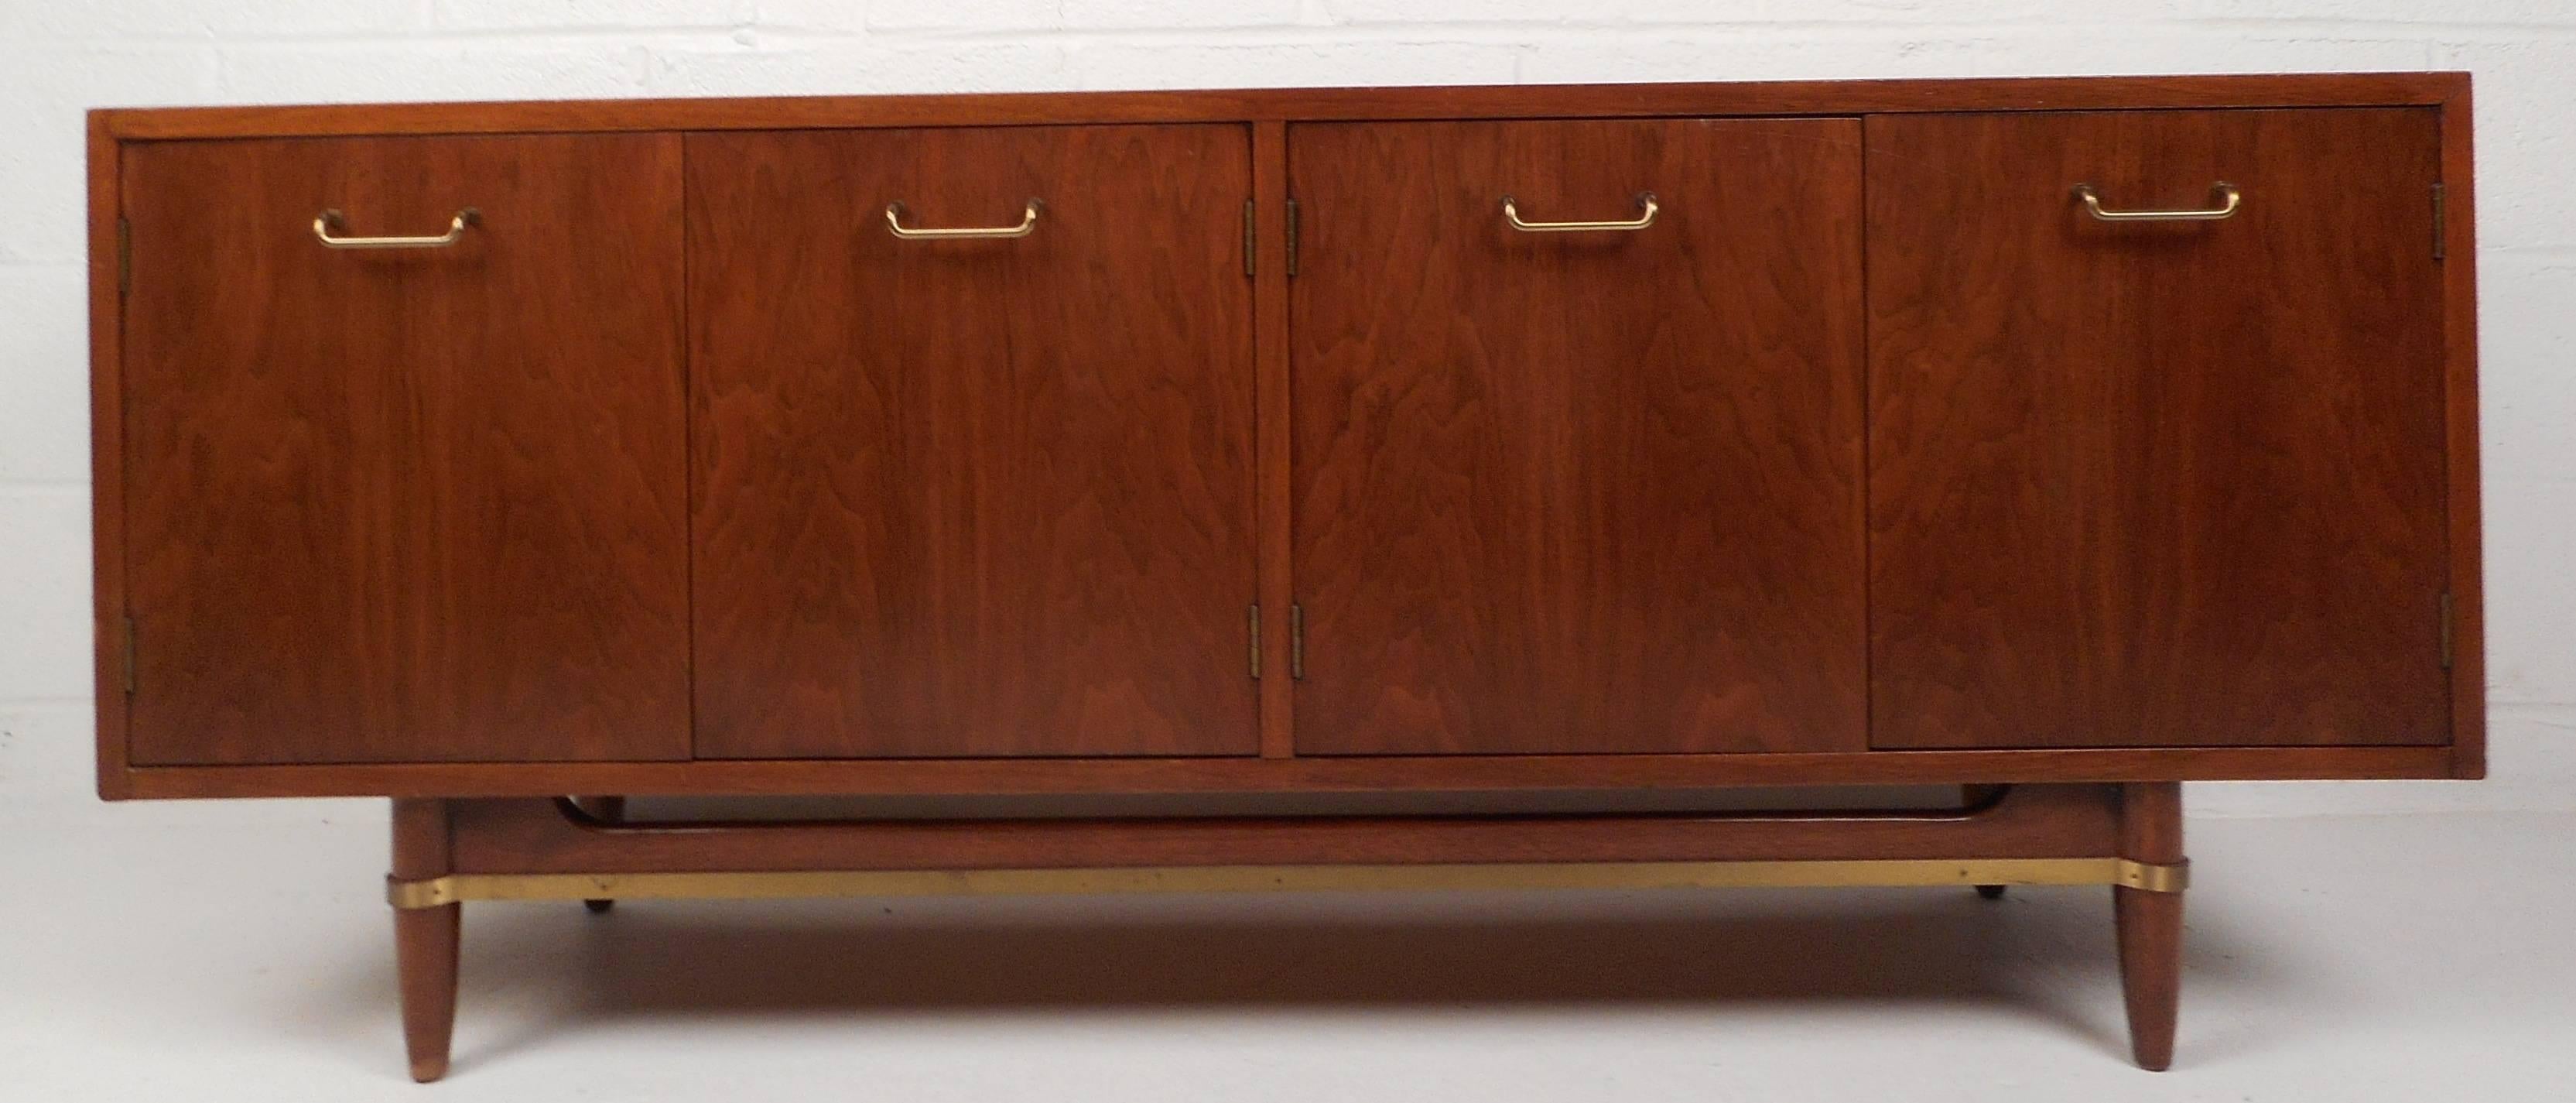 Stunning vintage modern small credenza features unique brass pulls and a vintage walnut finish. The stylish sculpted base has a brass trim stretcher and tapered legs. Two hefty storage cabinets and one drawer offer plenty of storage space without